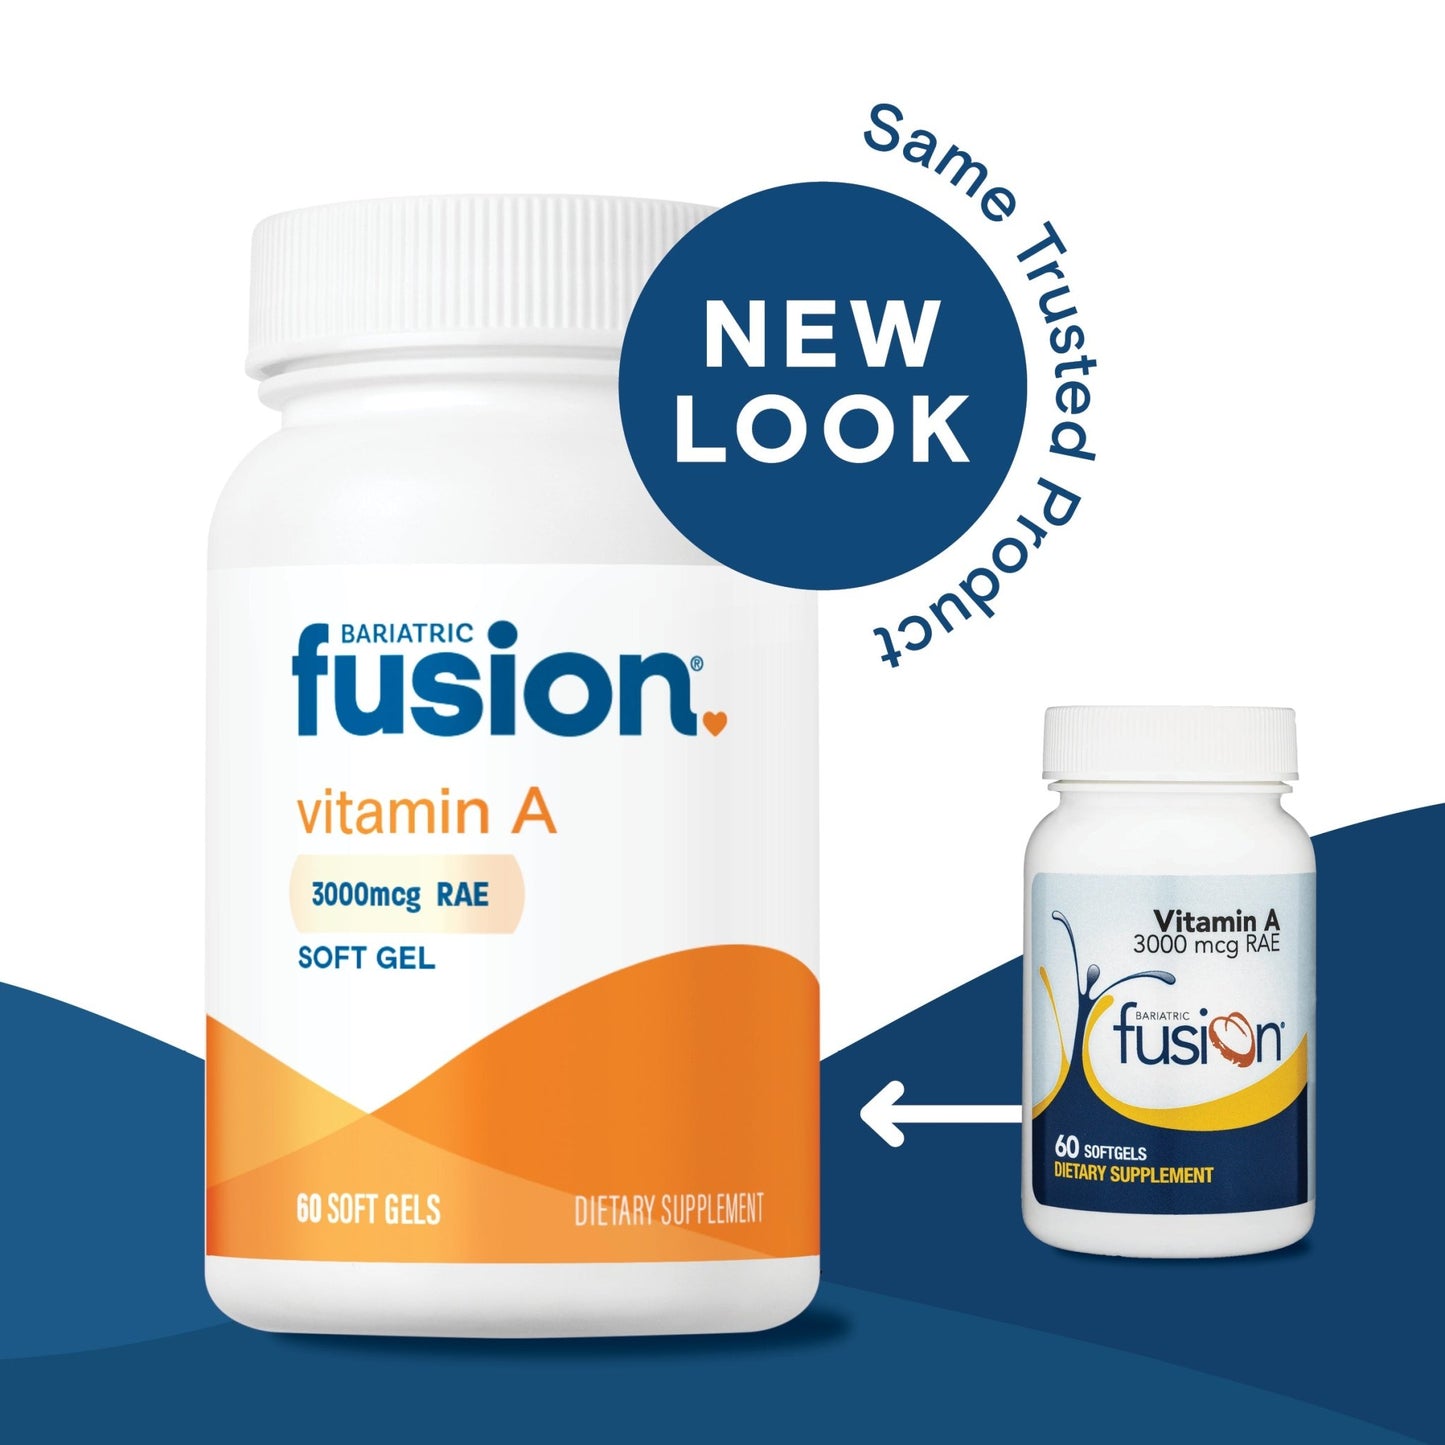 Bariatric Fusion Vitamin A Softgel new look, same trusted product.